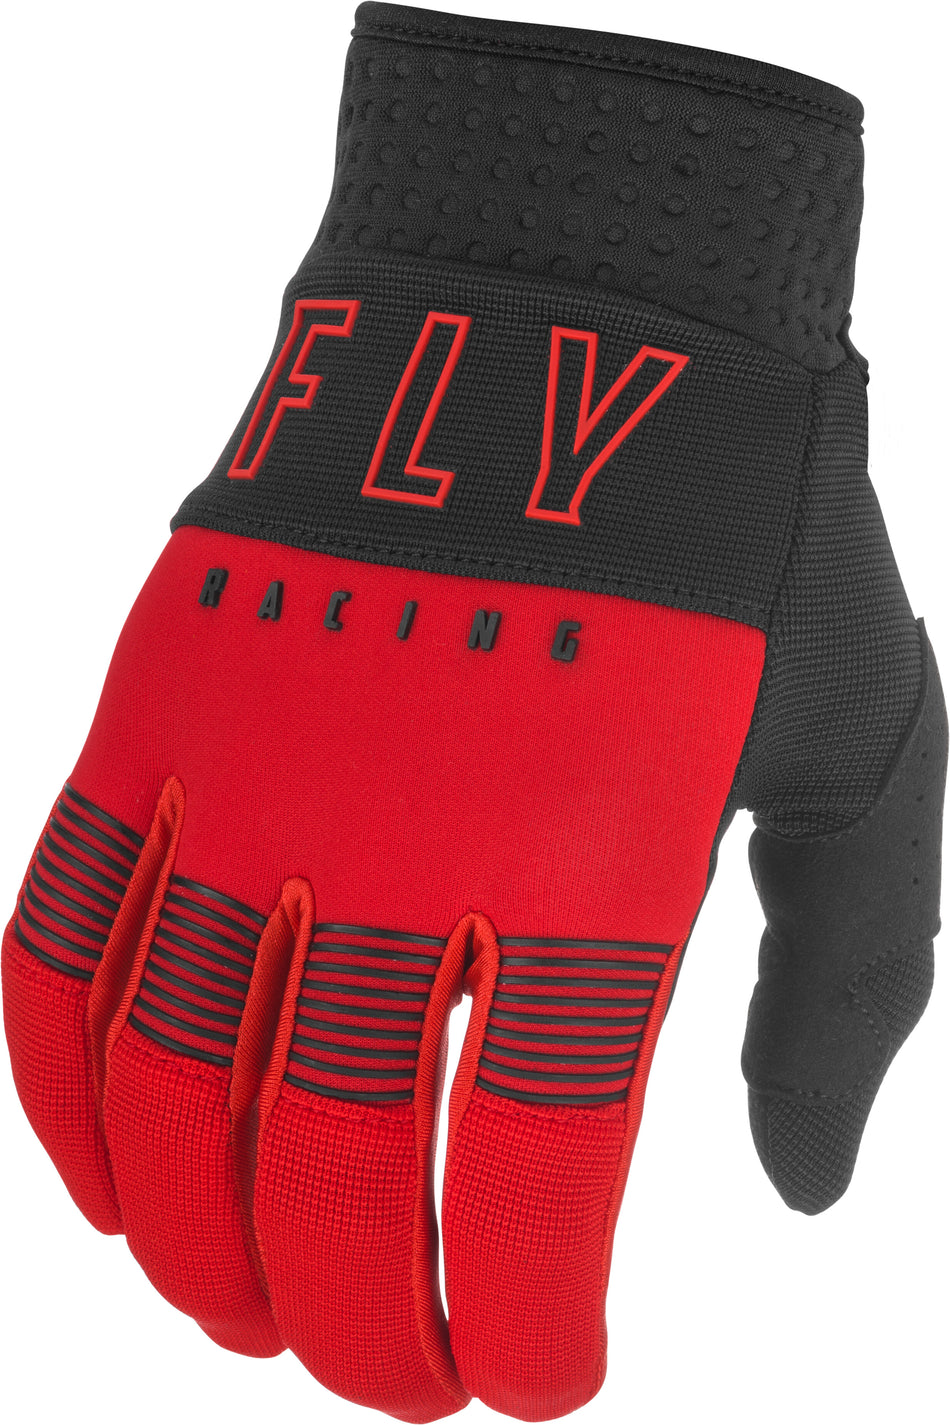 FLY RACING F-16 Gloves Red/Black Sz 07 374-91207